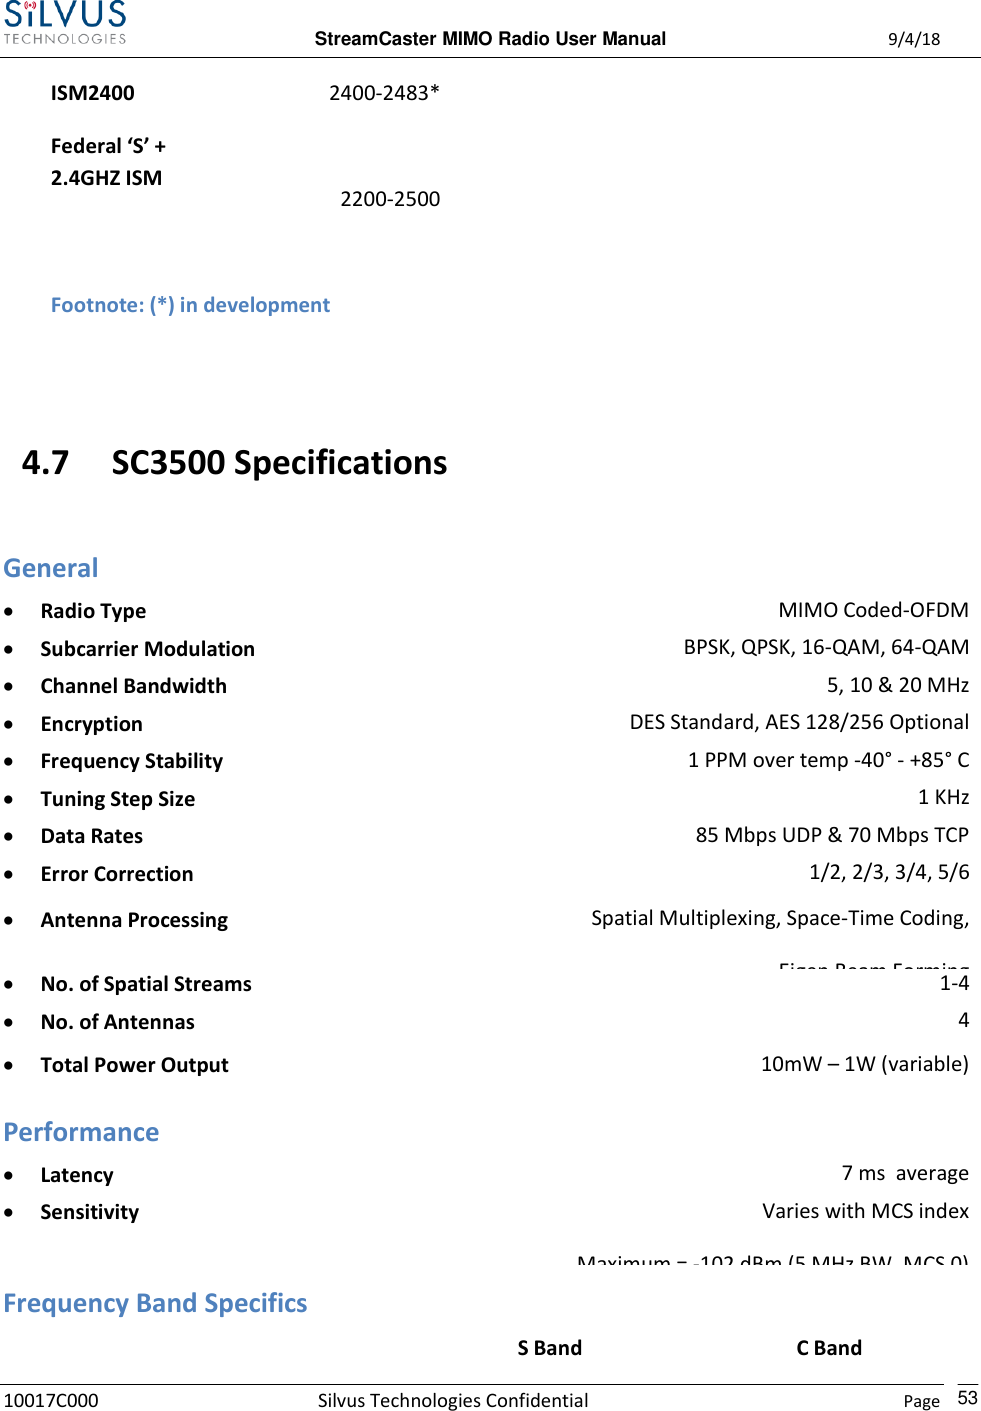  StreamCaster MIMO Radio User Manual  9/4/18 10017C000 Silvus Technologies Confidential    Page    53  ISM2400 Federal ‘S’ + 2.4GHZ ISM 2400-2483*   2200-2500           Footnote: (*) in development     4.7 SC3500 Specifications General  Radio Type MIMO Coded-OFDM  Subcarrier Modulation BPSK, QPSK, 16-QAM, 64-QAM  Channel Bandwidth 5, 10 &amp; 20 MHz  Encryption DES Standard, AES 128/256 Optional  Frequency Stability 1 PPM over temp -40° - +85° C  Tuning Step Size 1 KHz  Data Rates 85 Mbps UDP &amp; 70 Mbps TCP  Error Correction 1/2, 2/3, 3/4, 5/6  Antenna Processing Spatial Multiplexing, Space-Time Coding, Eigen Beam Forming  No. of Spatial Streams 1-4  No. of Antennas 4   Total Power Output 10mW – 1W (variable)  Performance  Latency 7 ms  average  Sensitivity Varies with MCS index Maximum = -102 dBm (5 MHz BW, MCS 0)  Frequency Band Specifics  S Band C Band 